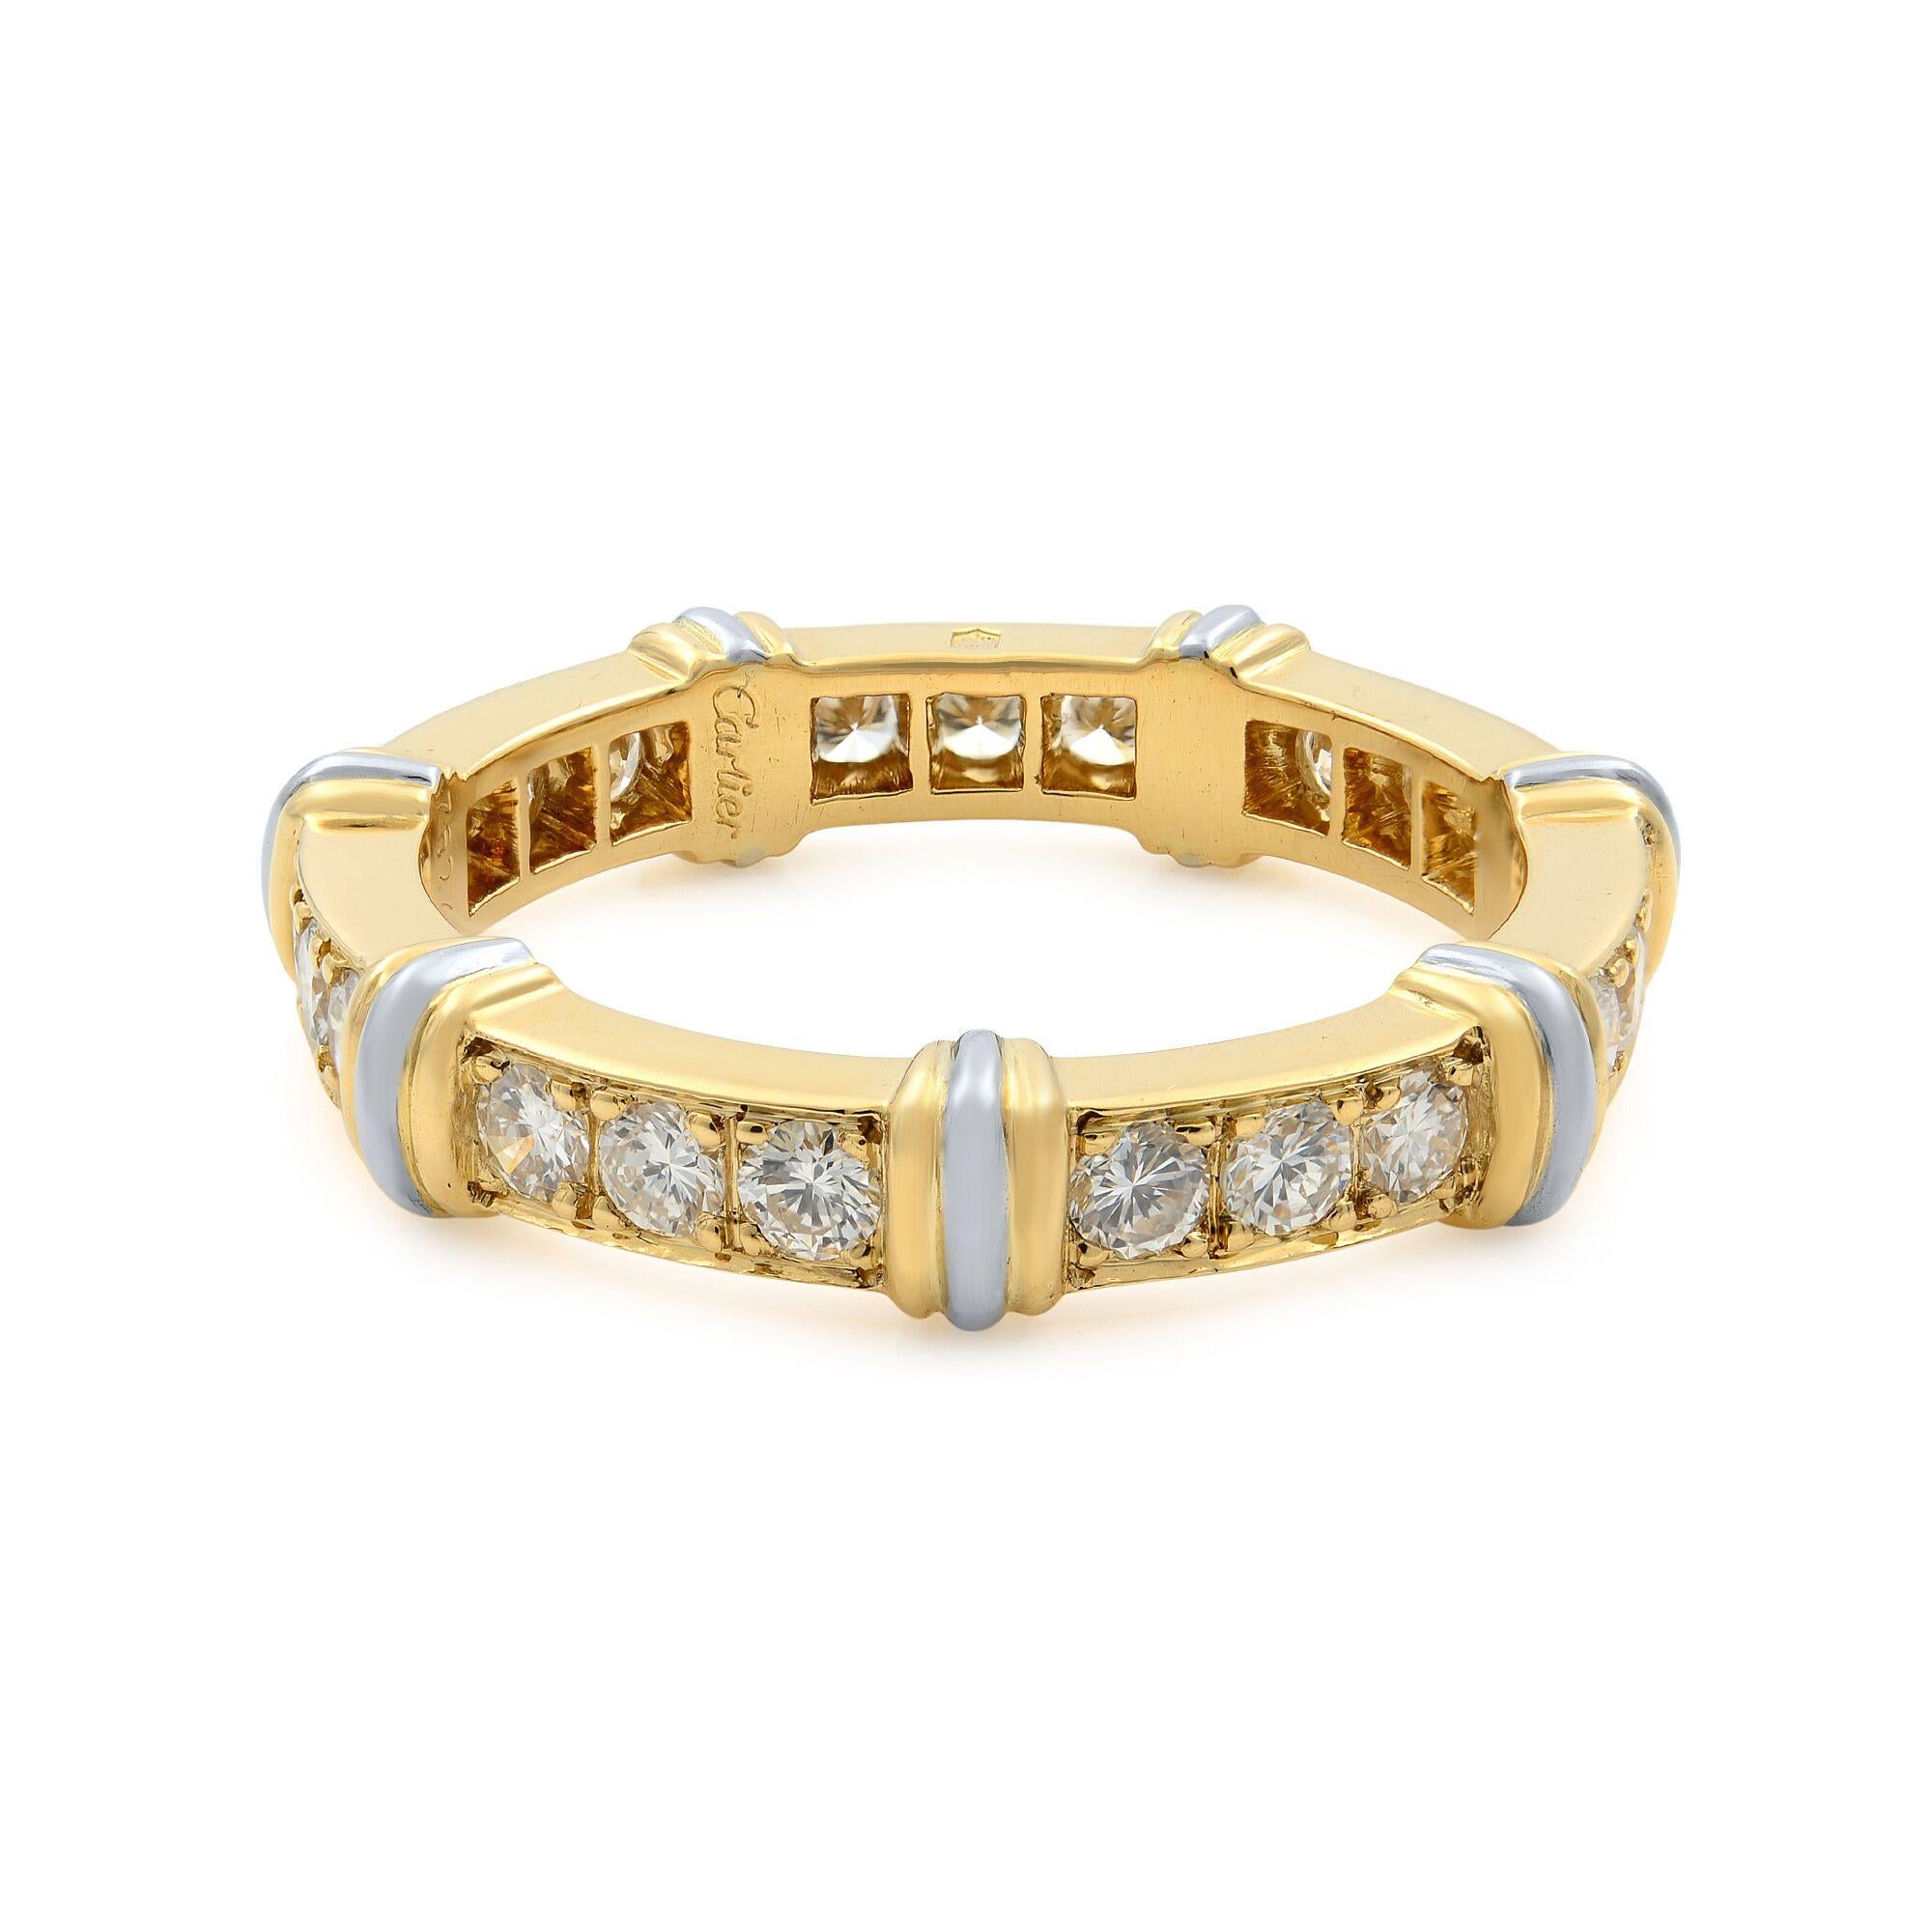 Cartier Vintage two-tone diamond eternity band ring. This ring is made from solid 18Kt yellow and white gold. Set with beautiful white round cut natural diamonds, F-G color and VS clarity. Total carat weight: 0.63cts. Size: US 7. Hallmarked: